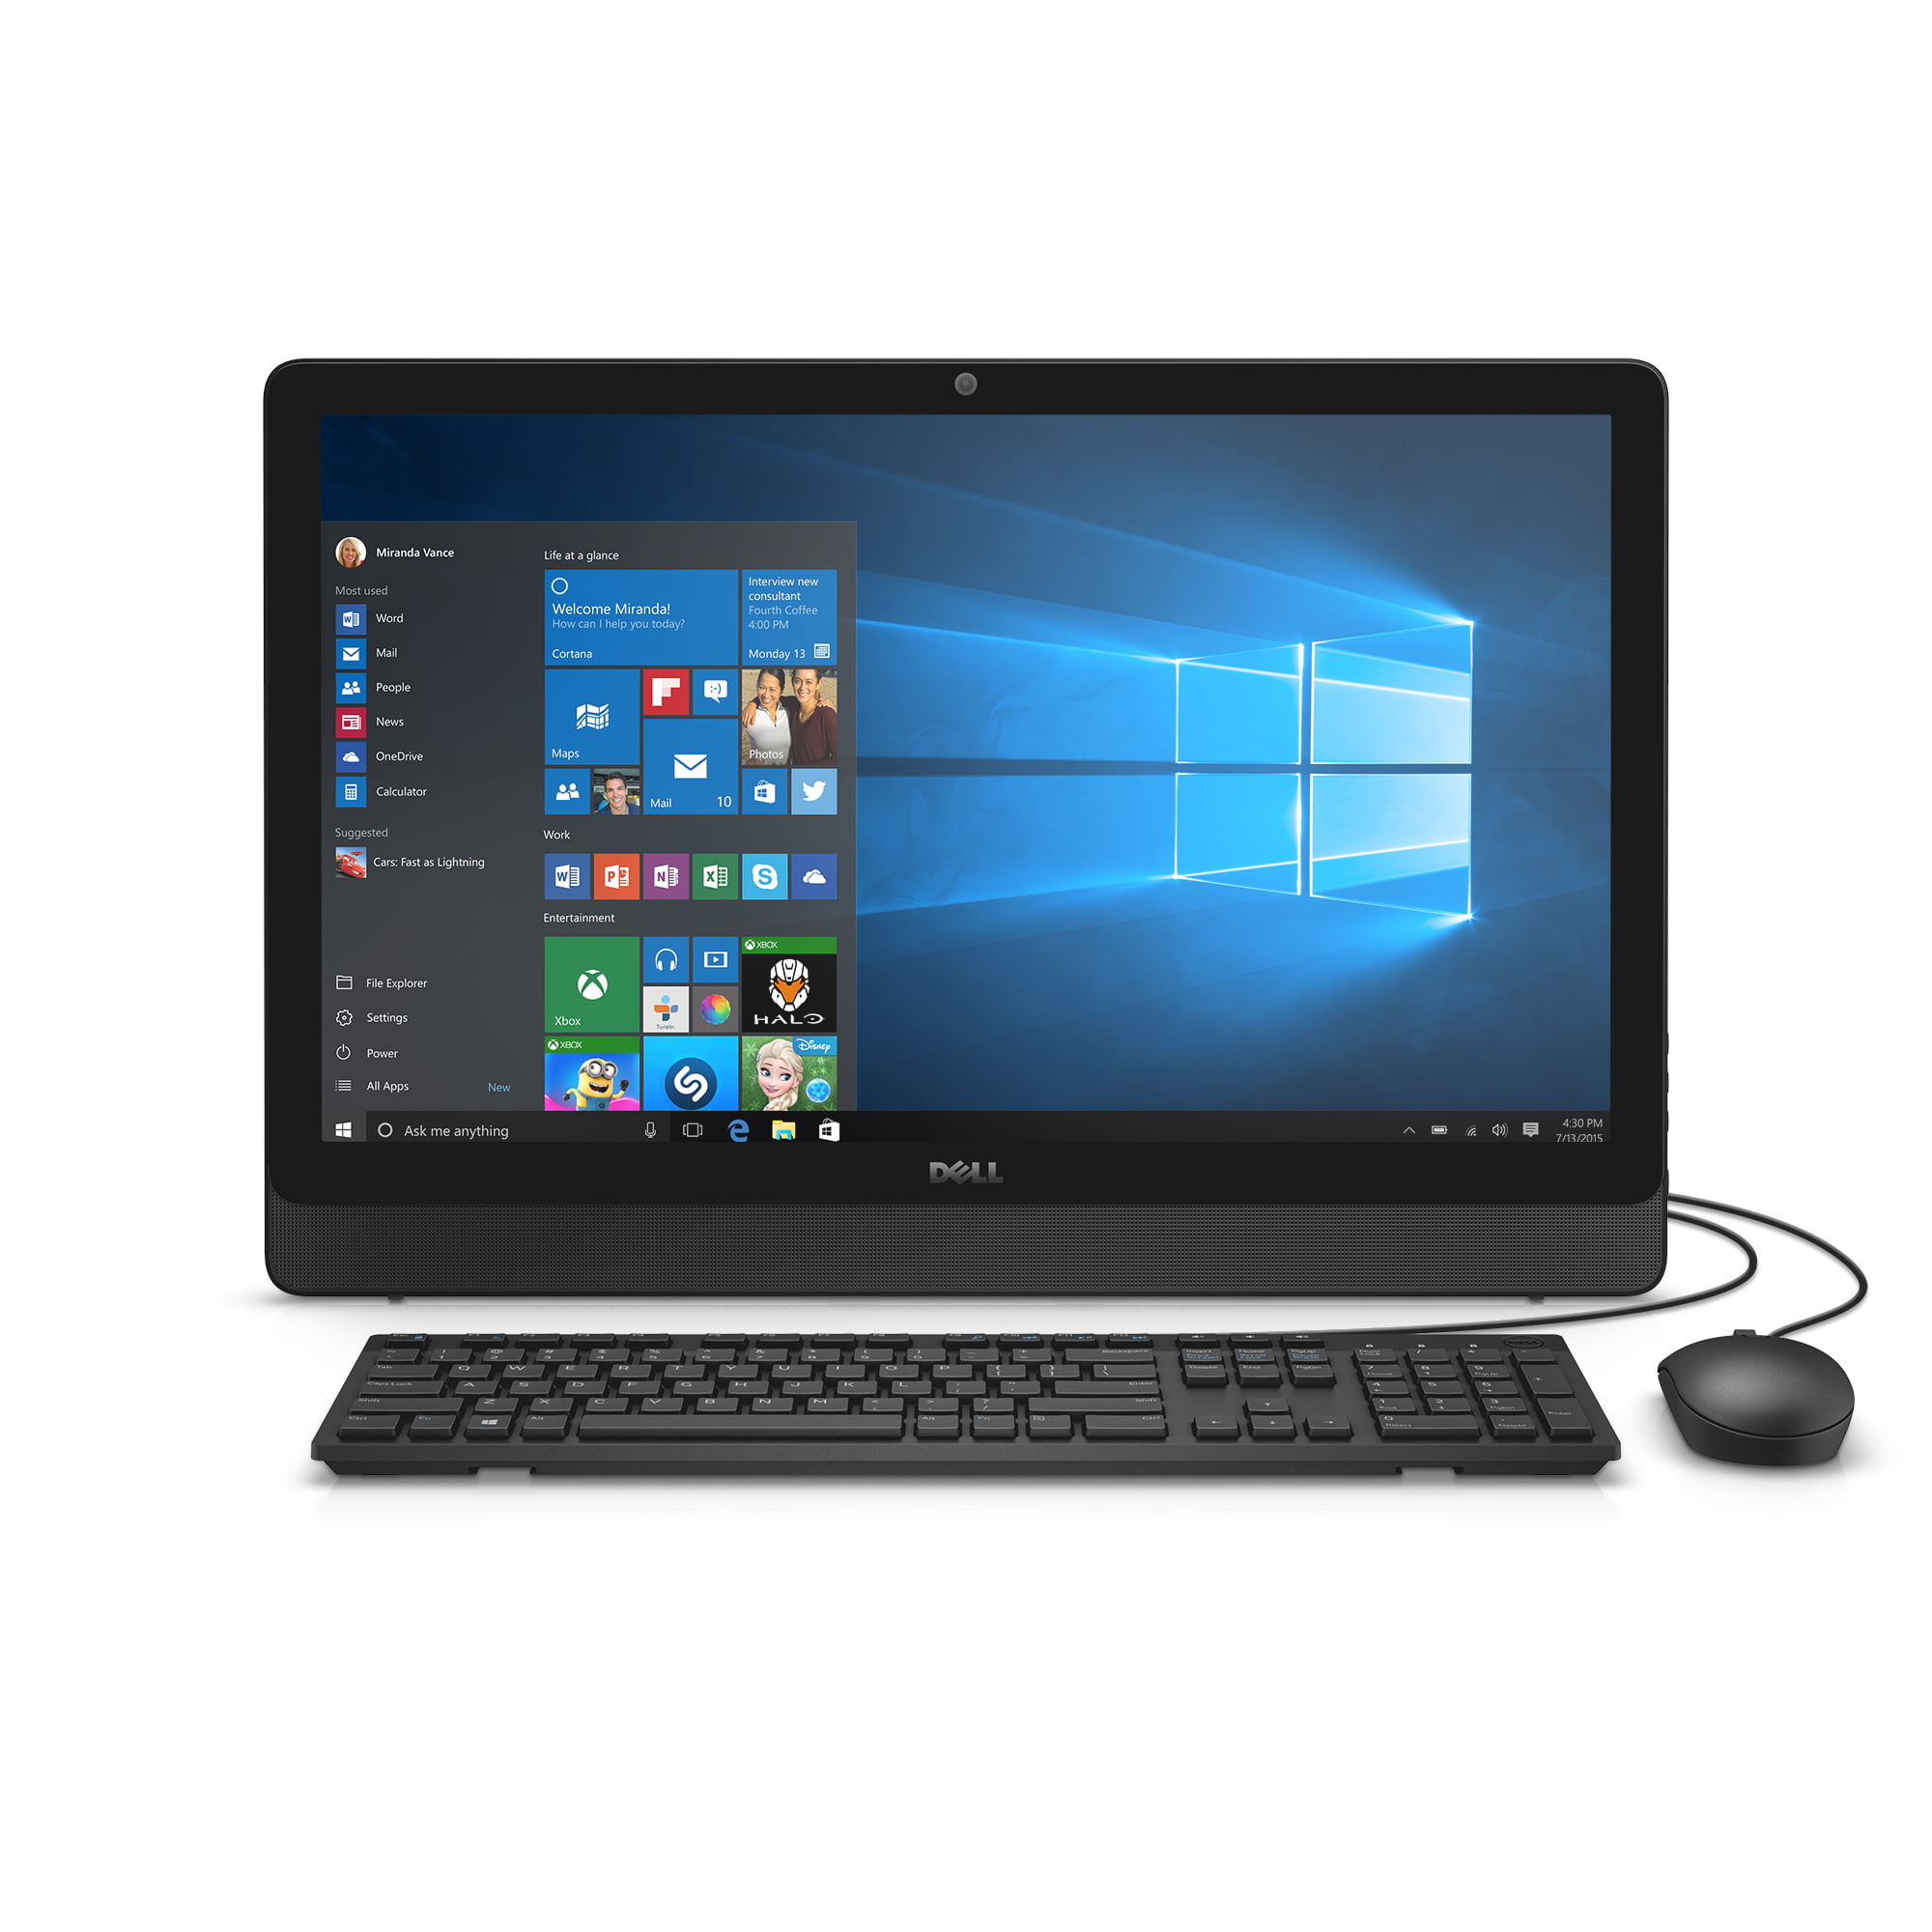 Dell Inspiron 24 All-in-One Desktop PC with AMD A8-7410 Processor, 8GB  Memory, 23.8